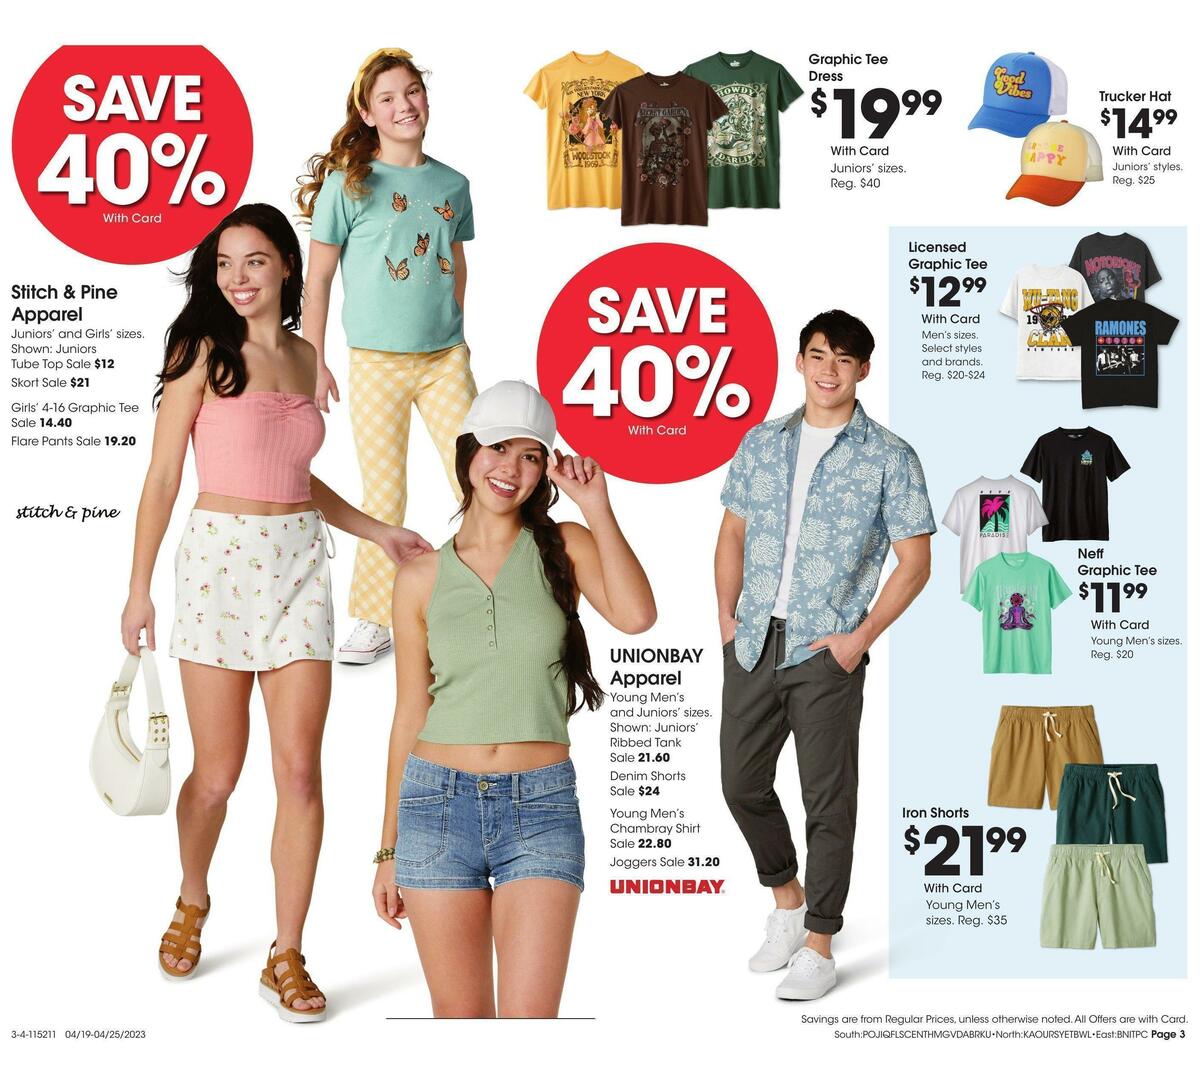 Fred Meyer General Merchandise Weekly Ad from April 19